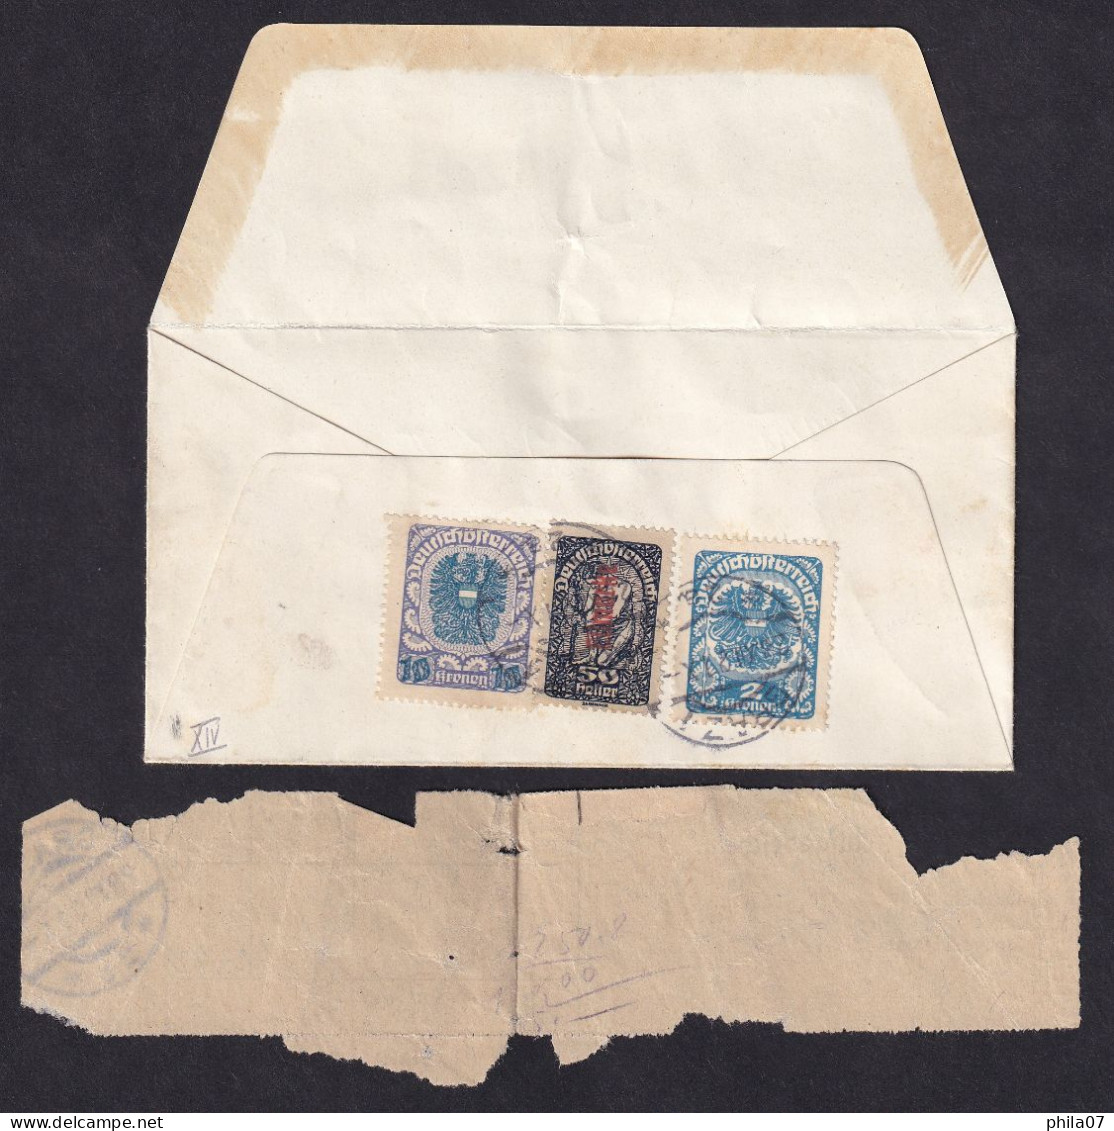 AUSTRIA - Letter Sent By Registered Mail Loco Graz 28.12.1921. Franking On The Back Of Letter With Three Stamps / 3 Scan - Covers & Documents